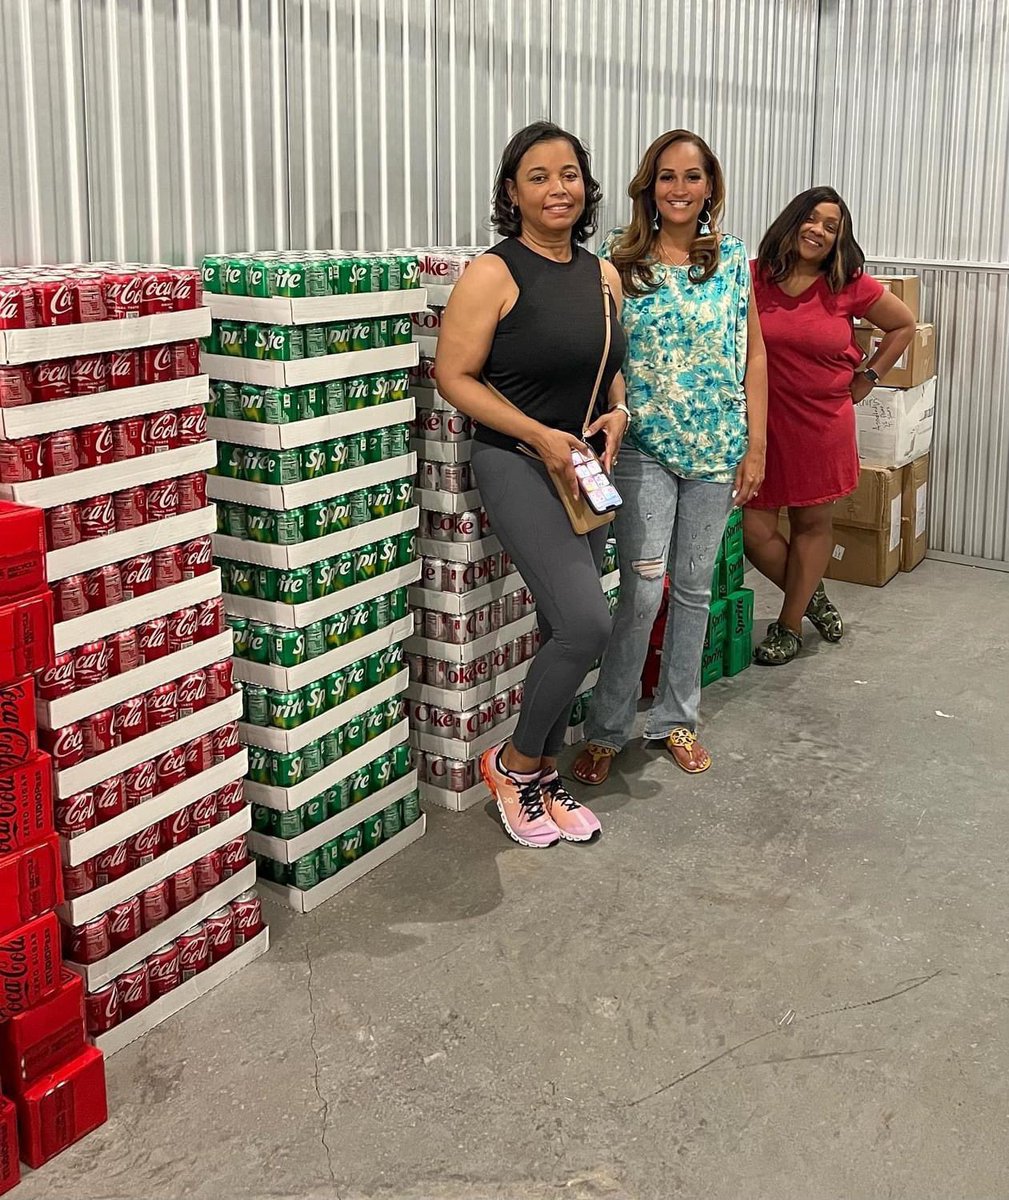 We are excited to host 1300+ sisters next week for the 47th Southern Area Conference!

Yesterday we picked up 250+ cases of soda. Thank you corporate #SAC47 sponsor @cocacola !!

#cltlinks #charlottelinks #salinksinc #thelinksinc @salinksinc #RoyalCourtCluster